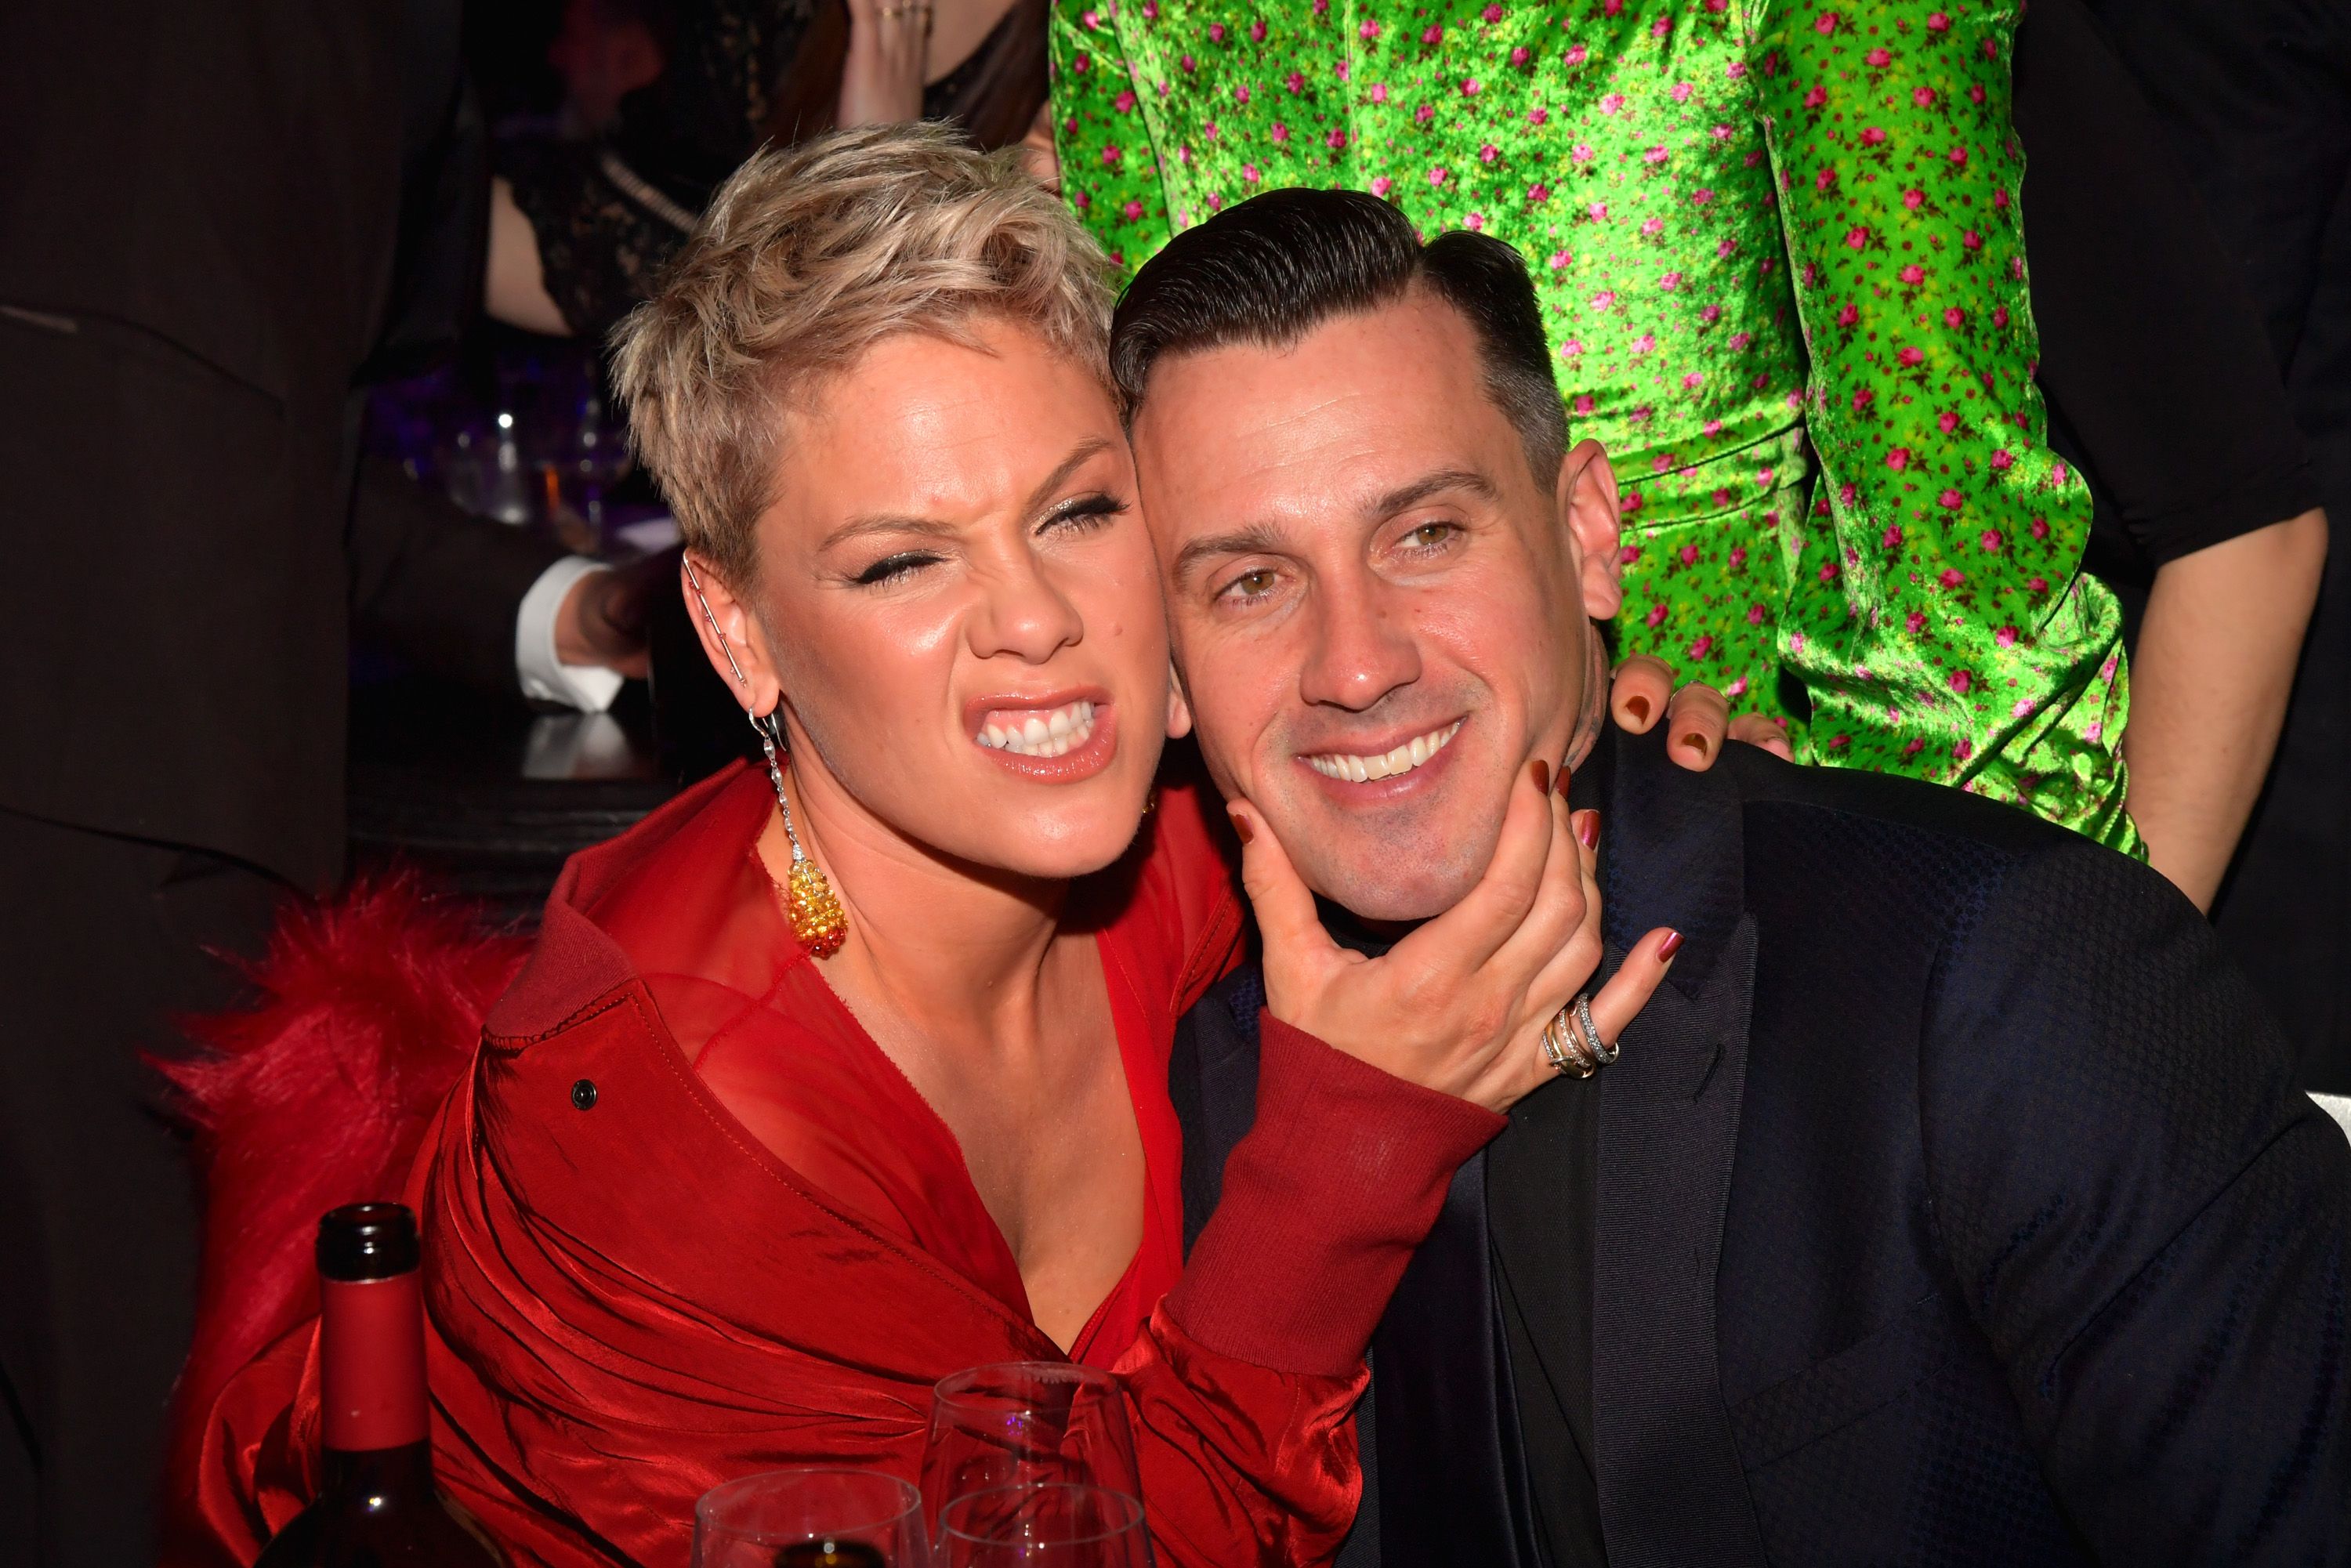 Pink and Carey Hart at the Clive Davis and Recording Academy Pre-GRAMMY Gala and GRAMMY Salute to Industry Icons Honoring Jay-Z on January 27, 2018 | Photo: Getty Images